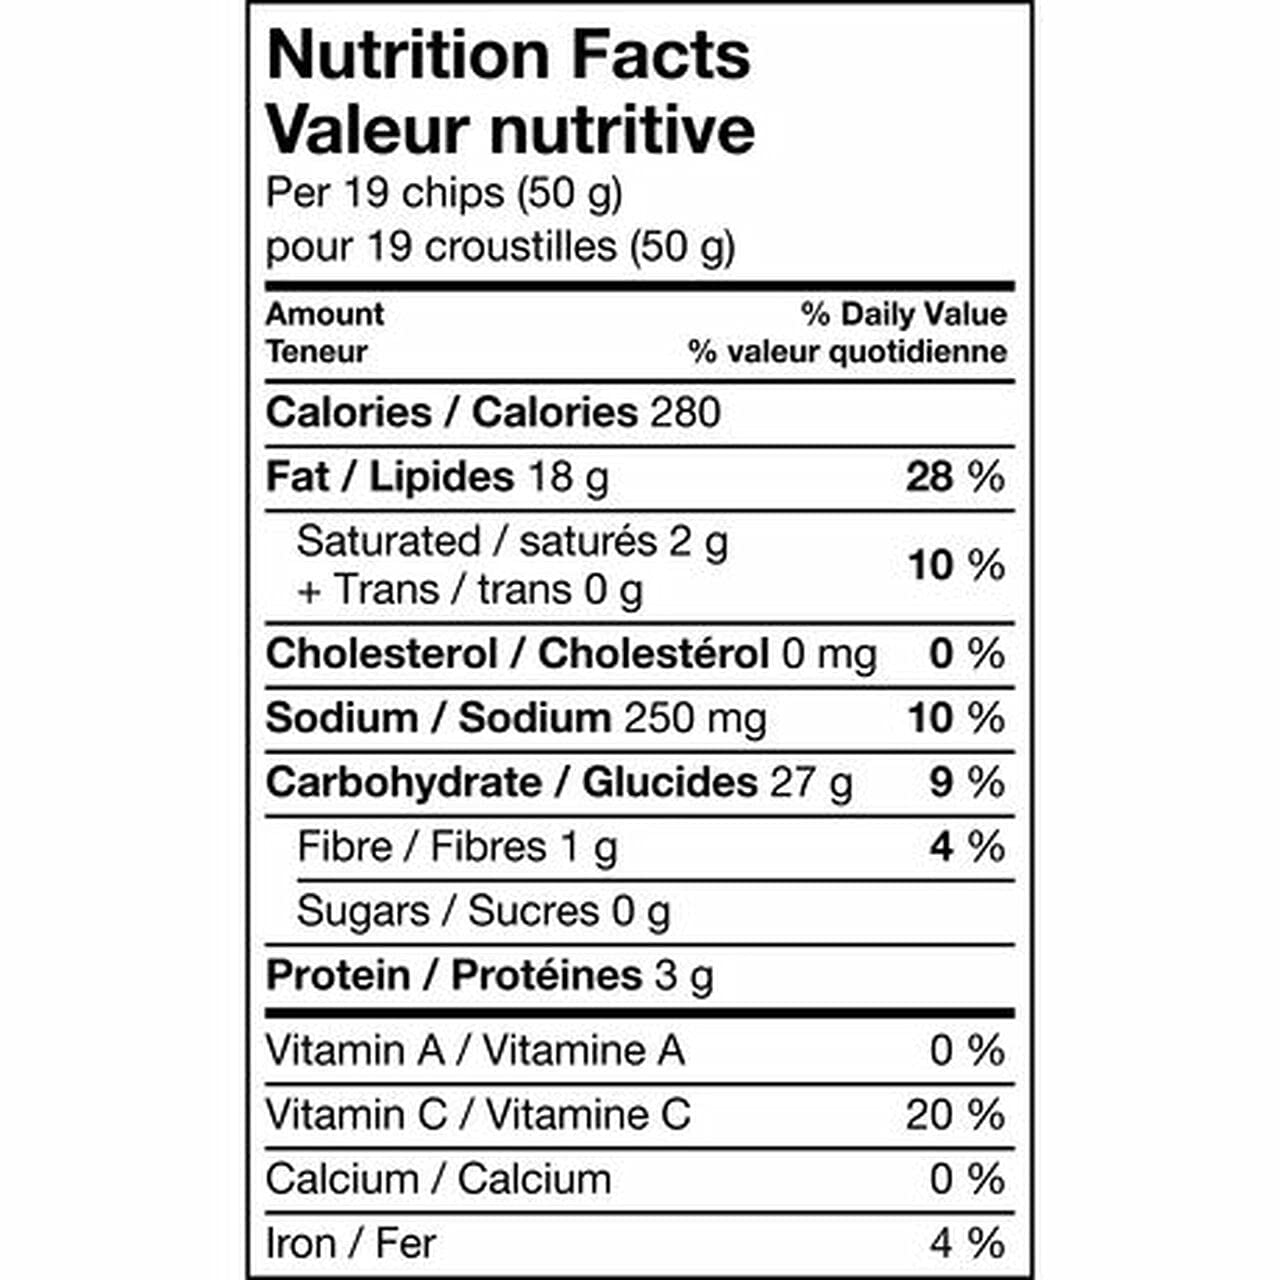 Lay's Wavy Original Potato Chips Nutritional Facts